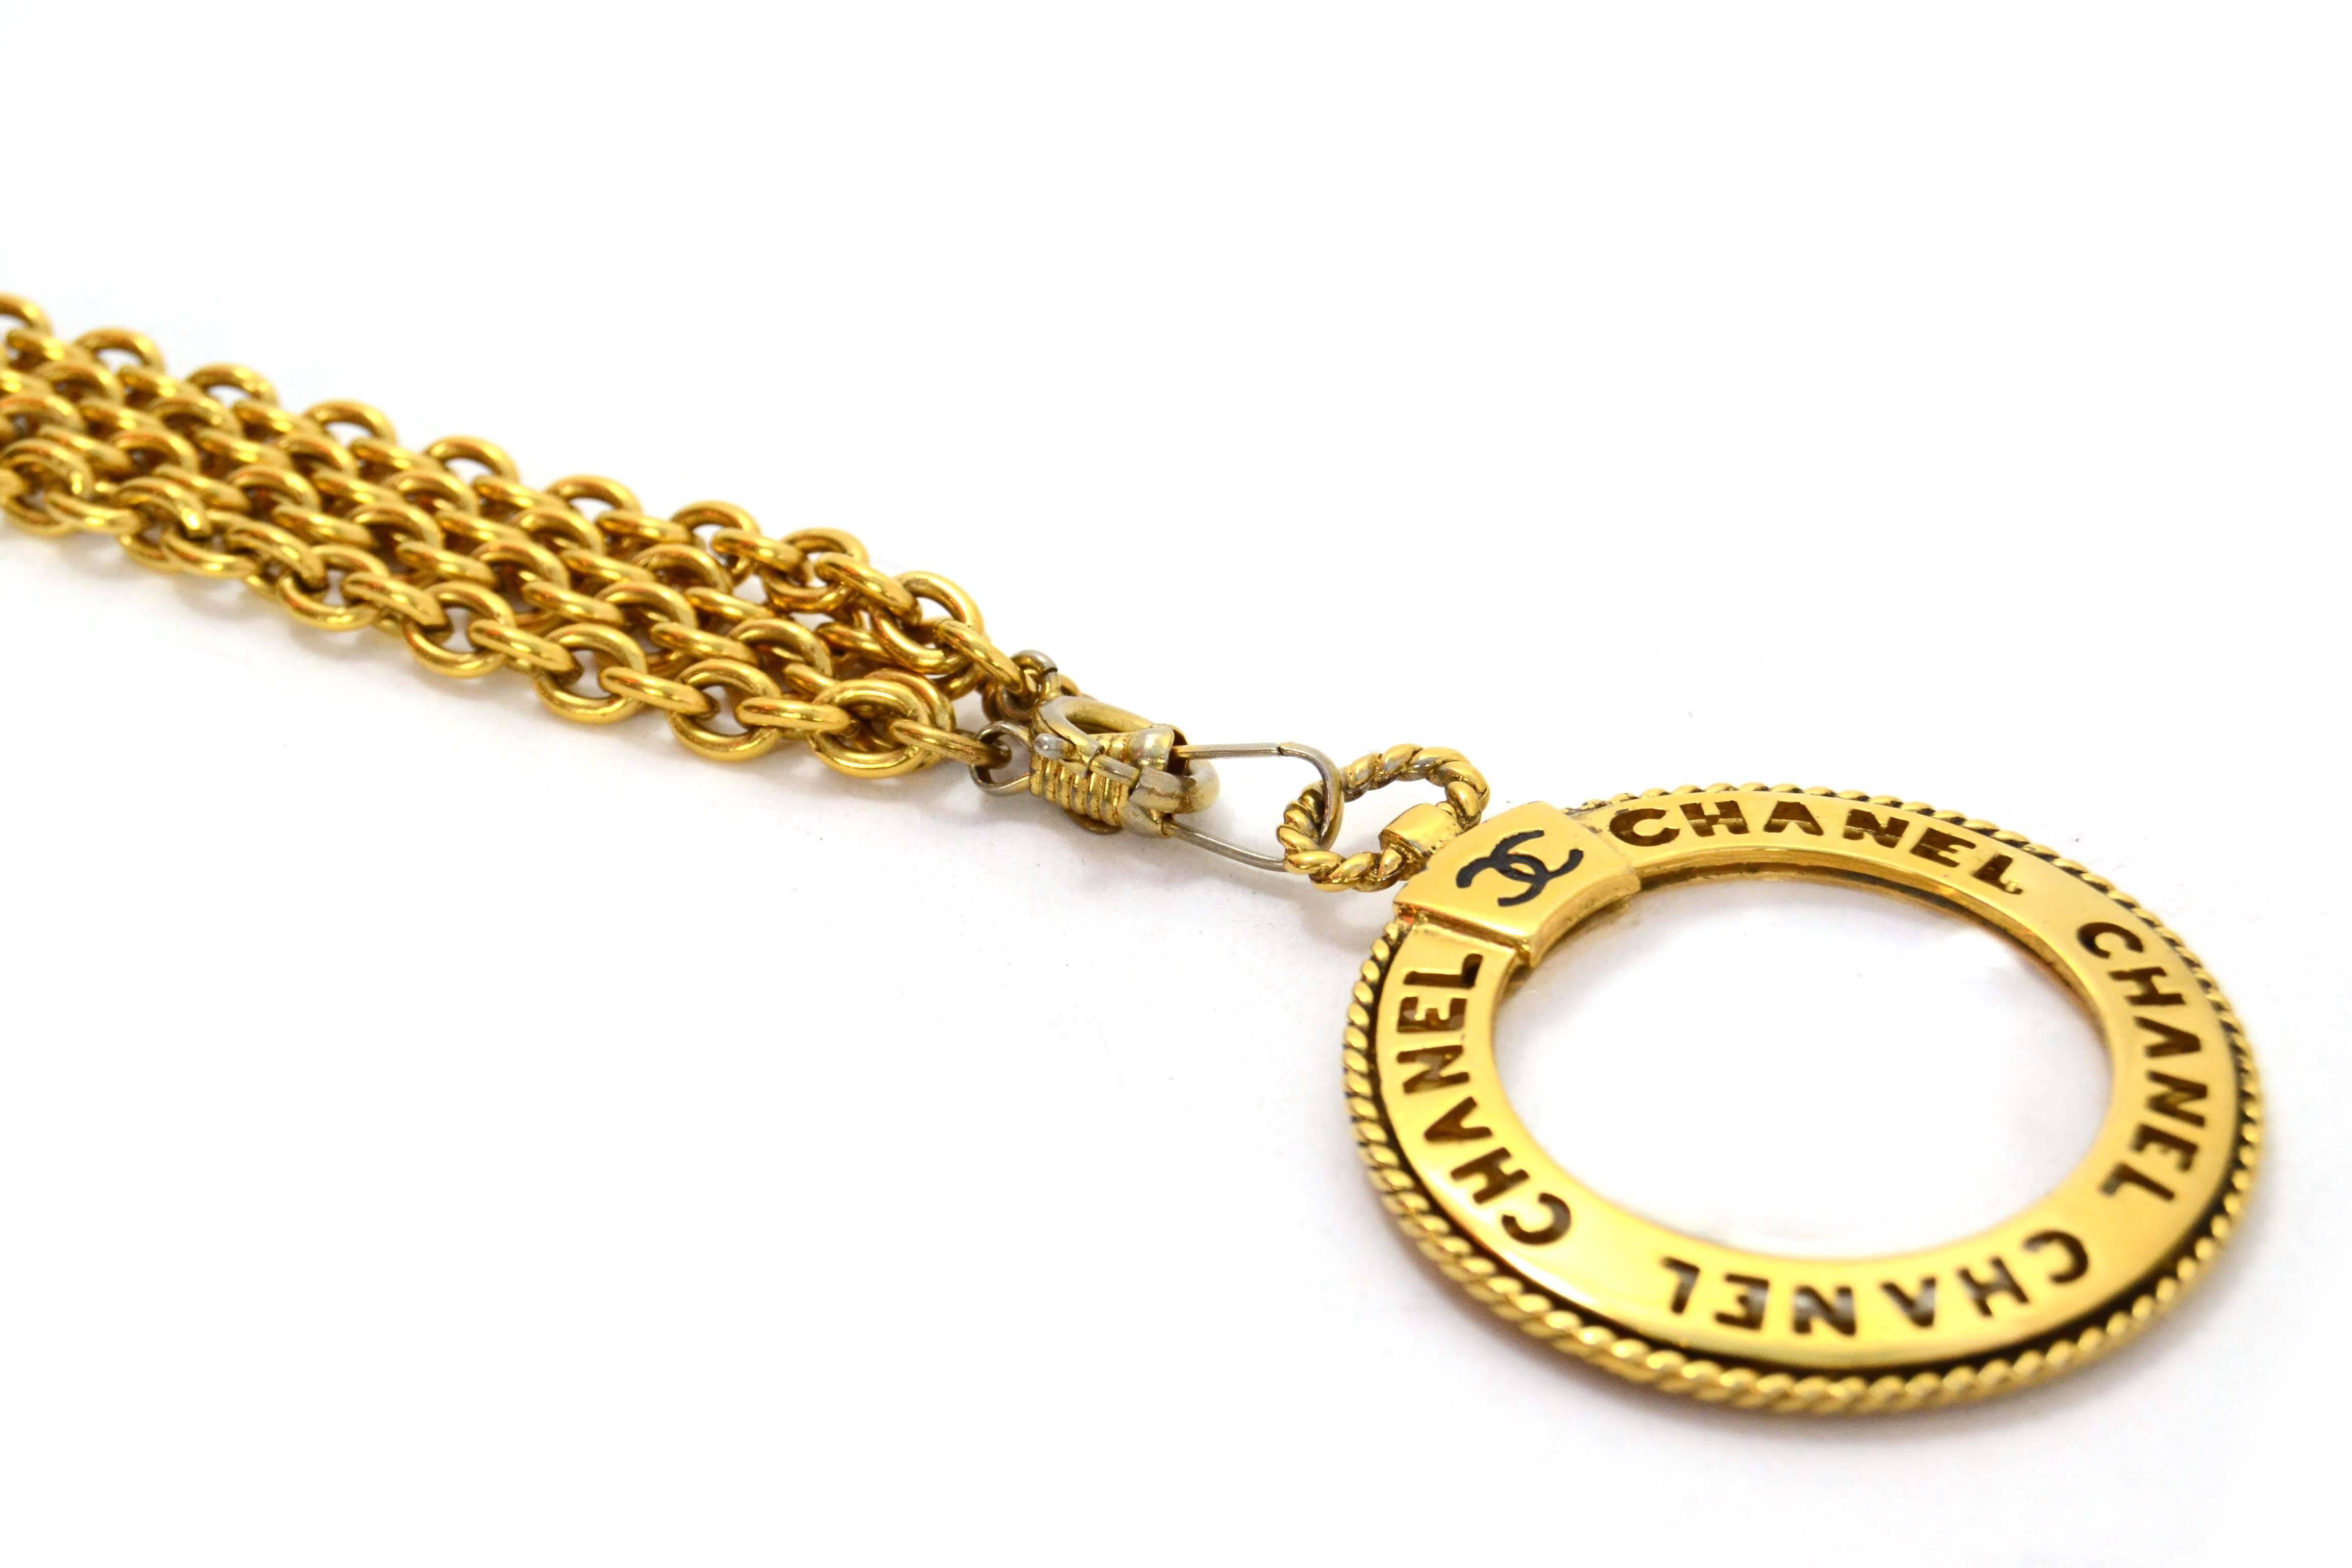 Chanel Vintage ‘70s-‘80s Double Chain Link Magnifying Glass Necklace
Features CC and Chanel etched out around magnifying glass pendant
Made In: France
Year of Production: 1970’s-1980’s
Color: Goldtone
Materials: Metal and glass
Closure: Front